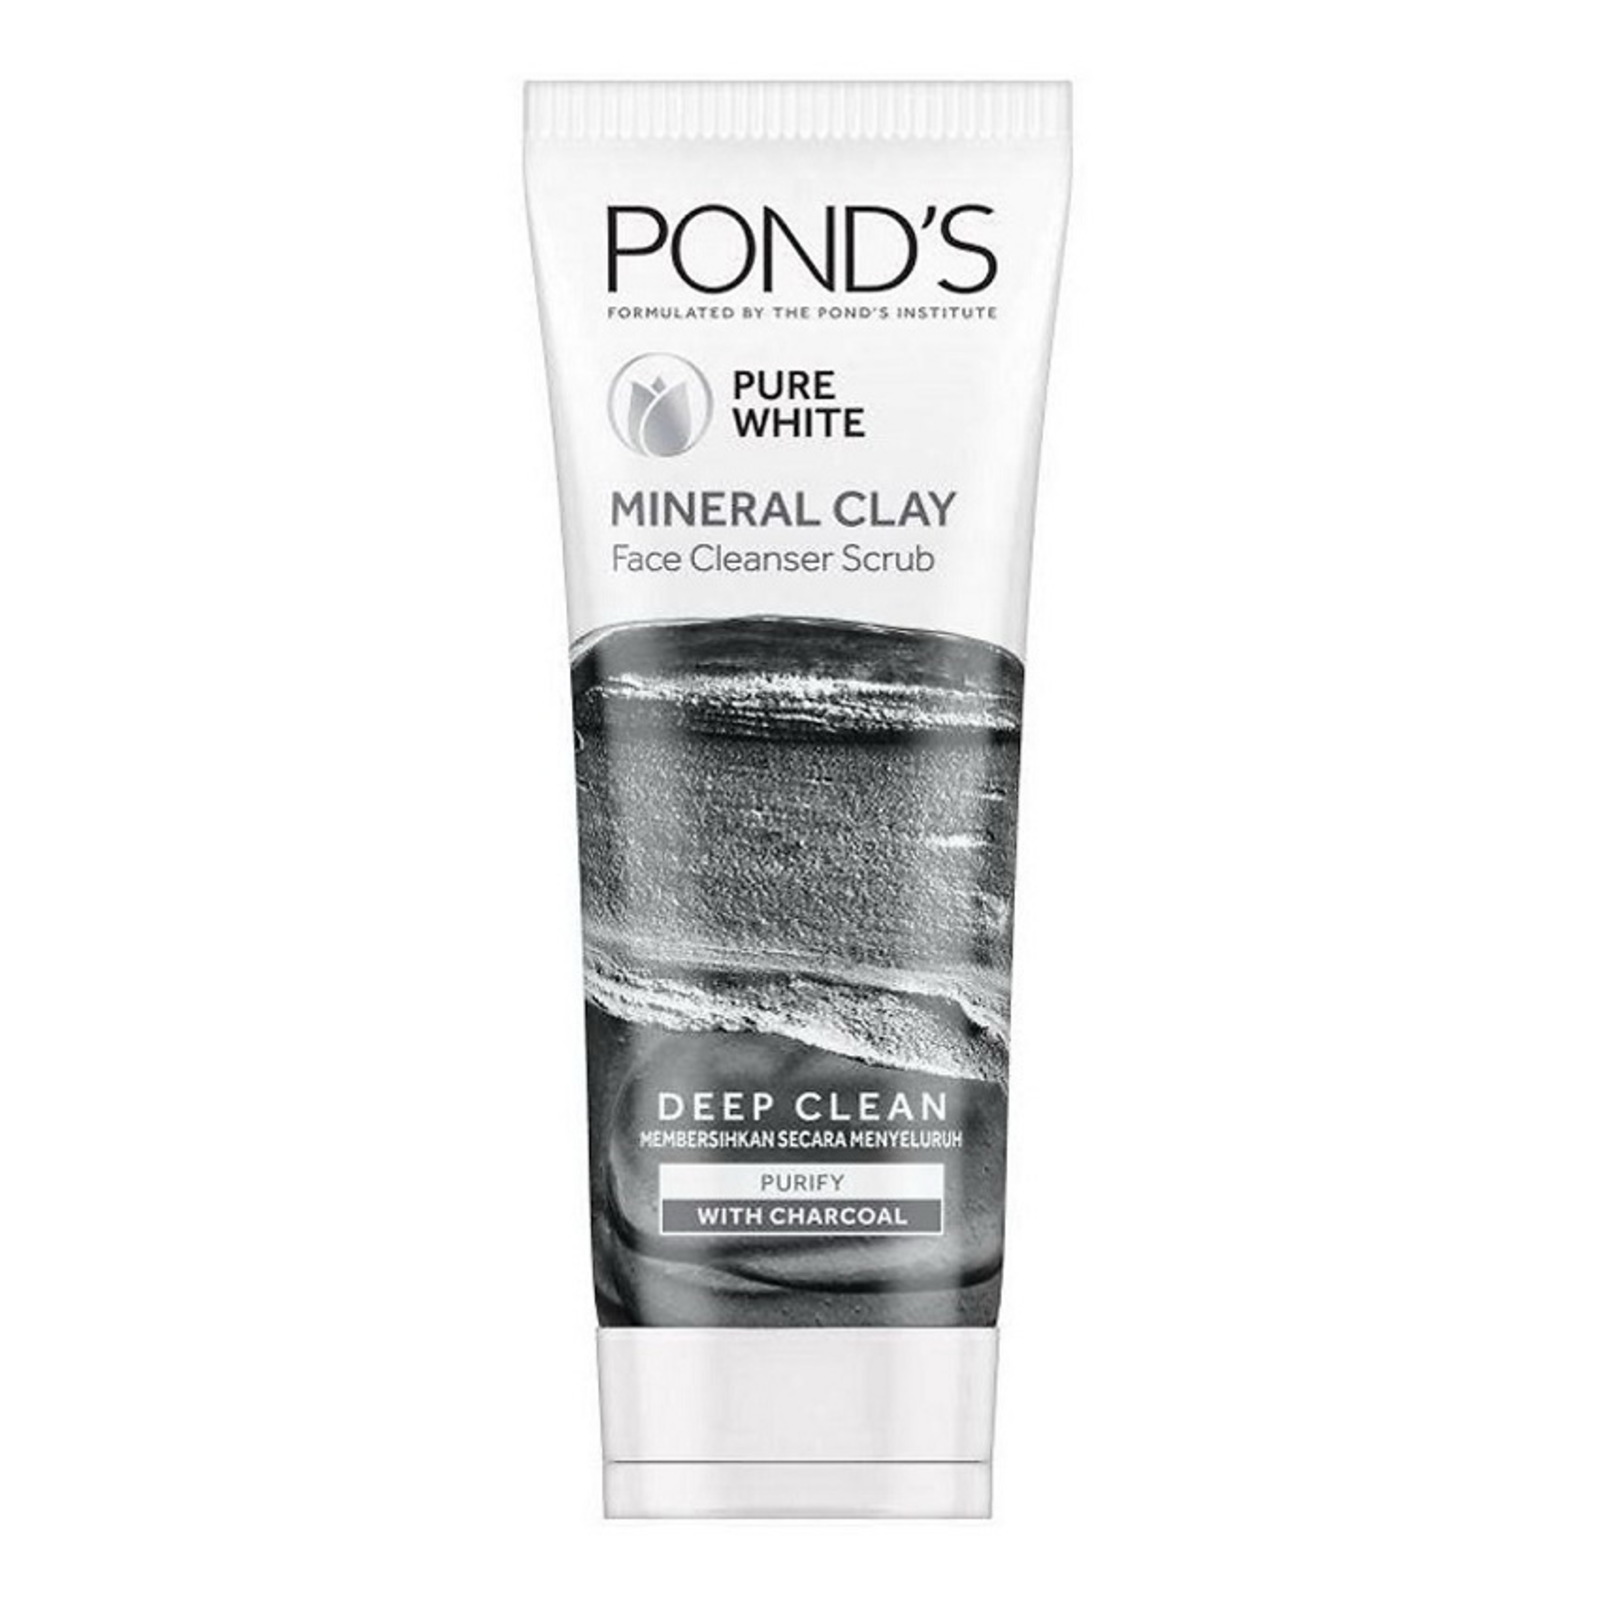 POND'S Mineral Clay Face Cleanser Scrub Pure White Deep Clean 90g tube – MEDiCARE